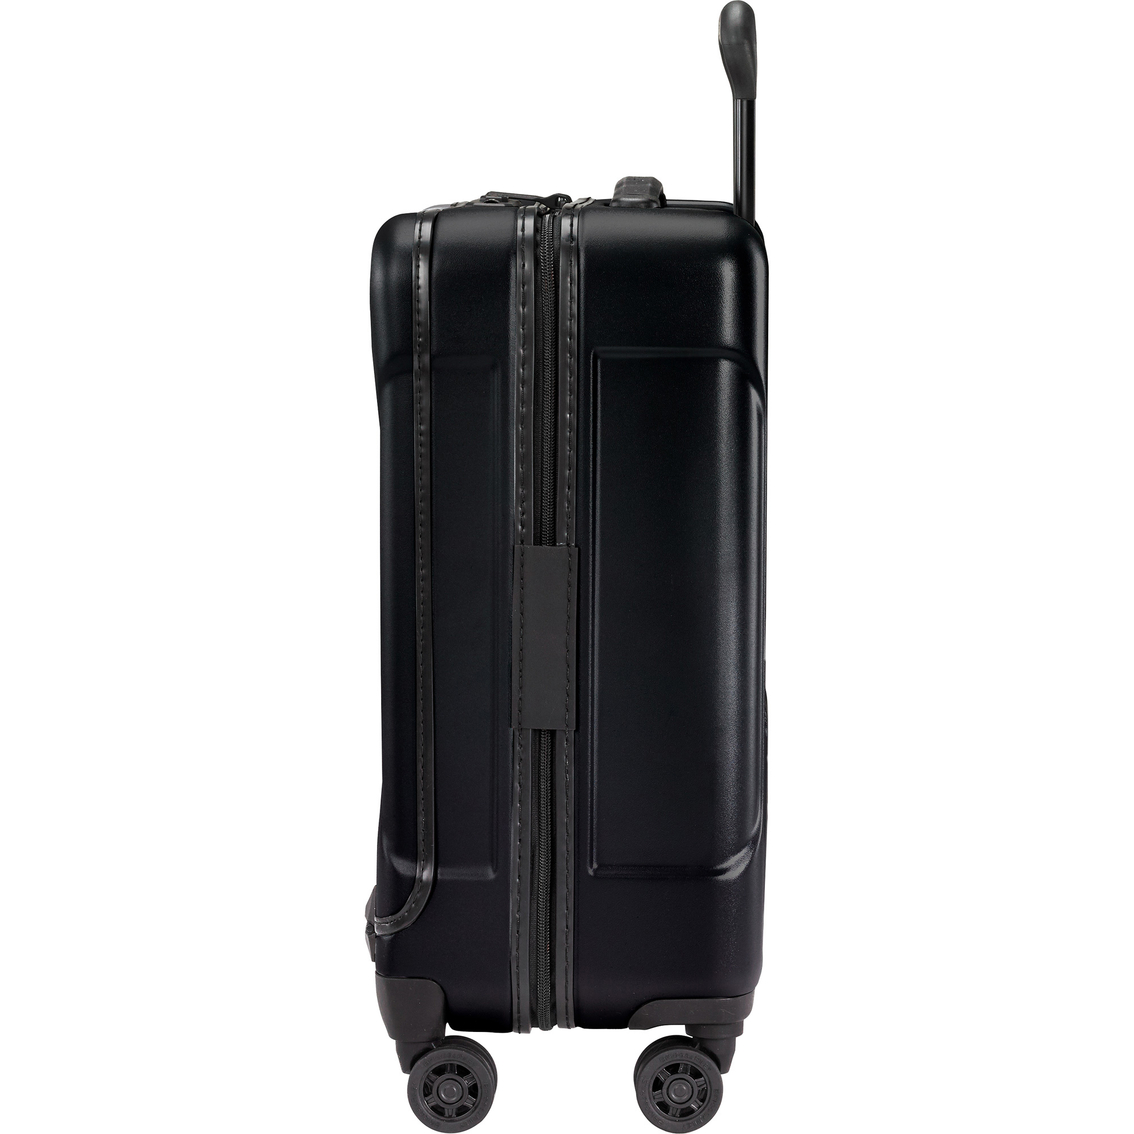 Briggs & Riley International Torq 21 in. Stealth Carry-On Spinner - Image 6 of 10